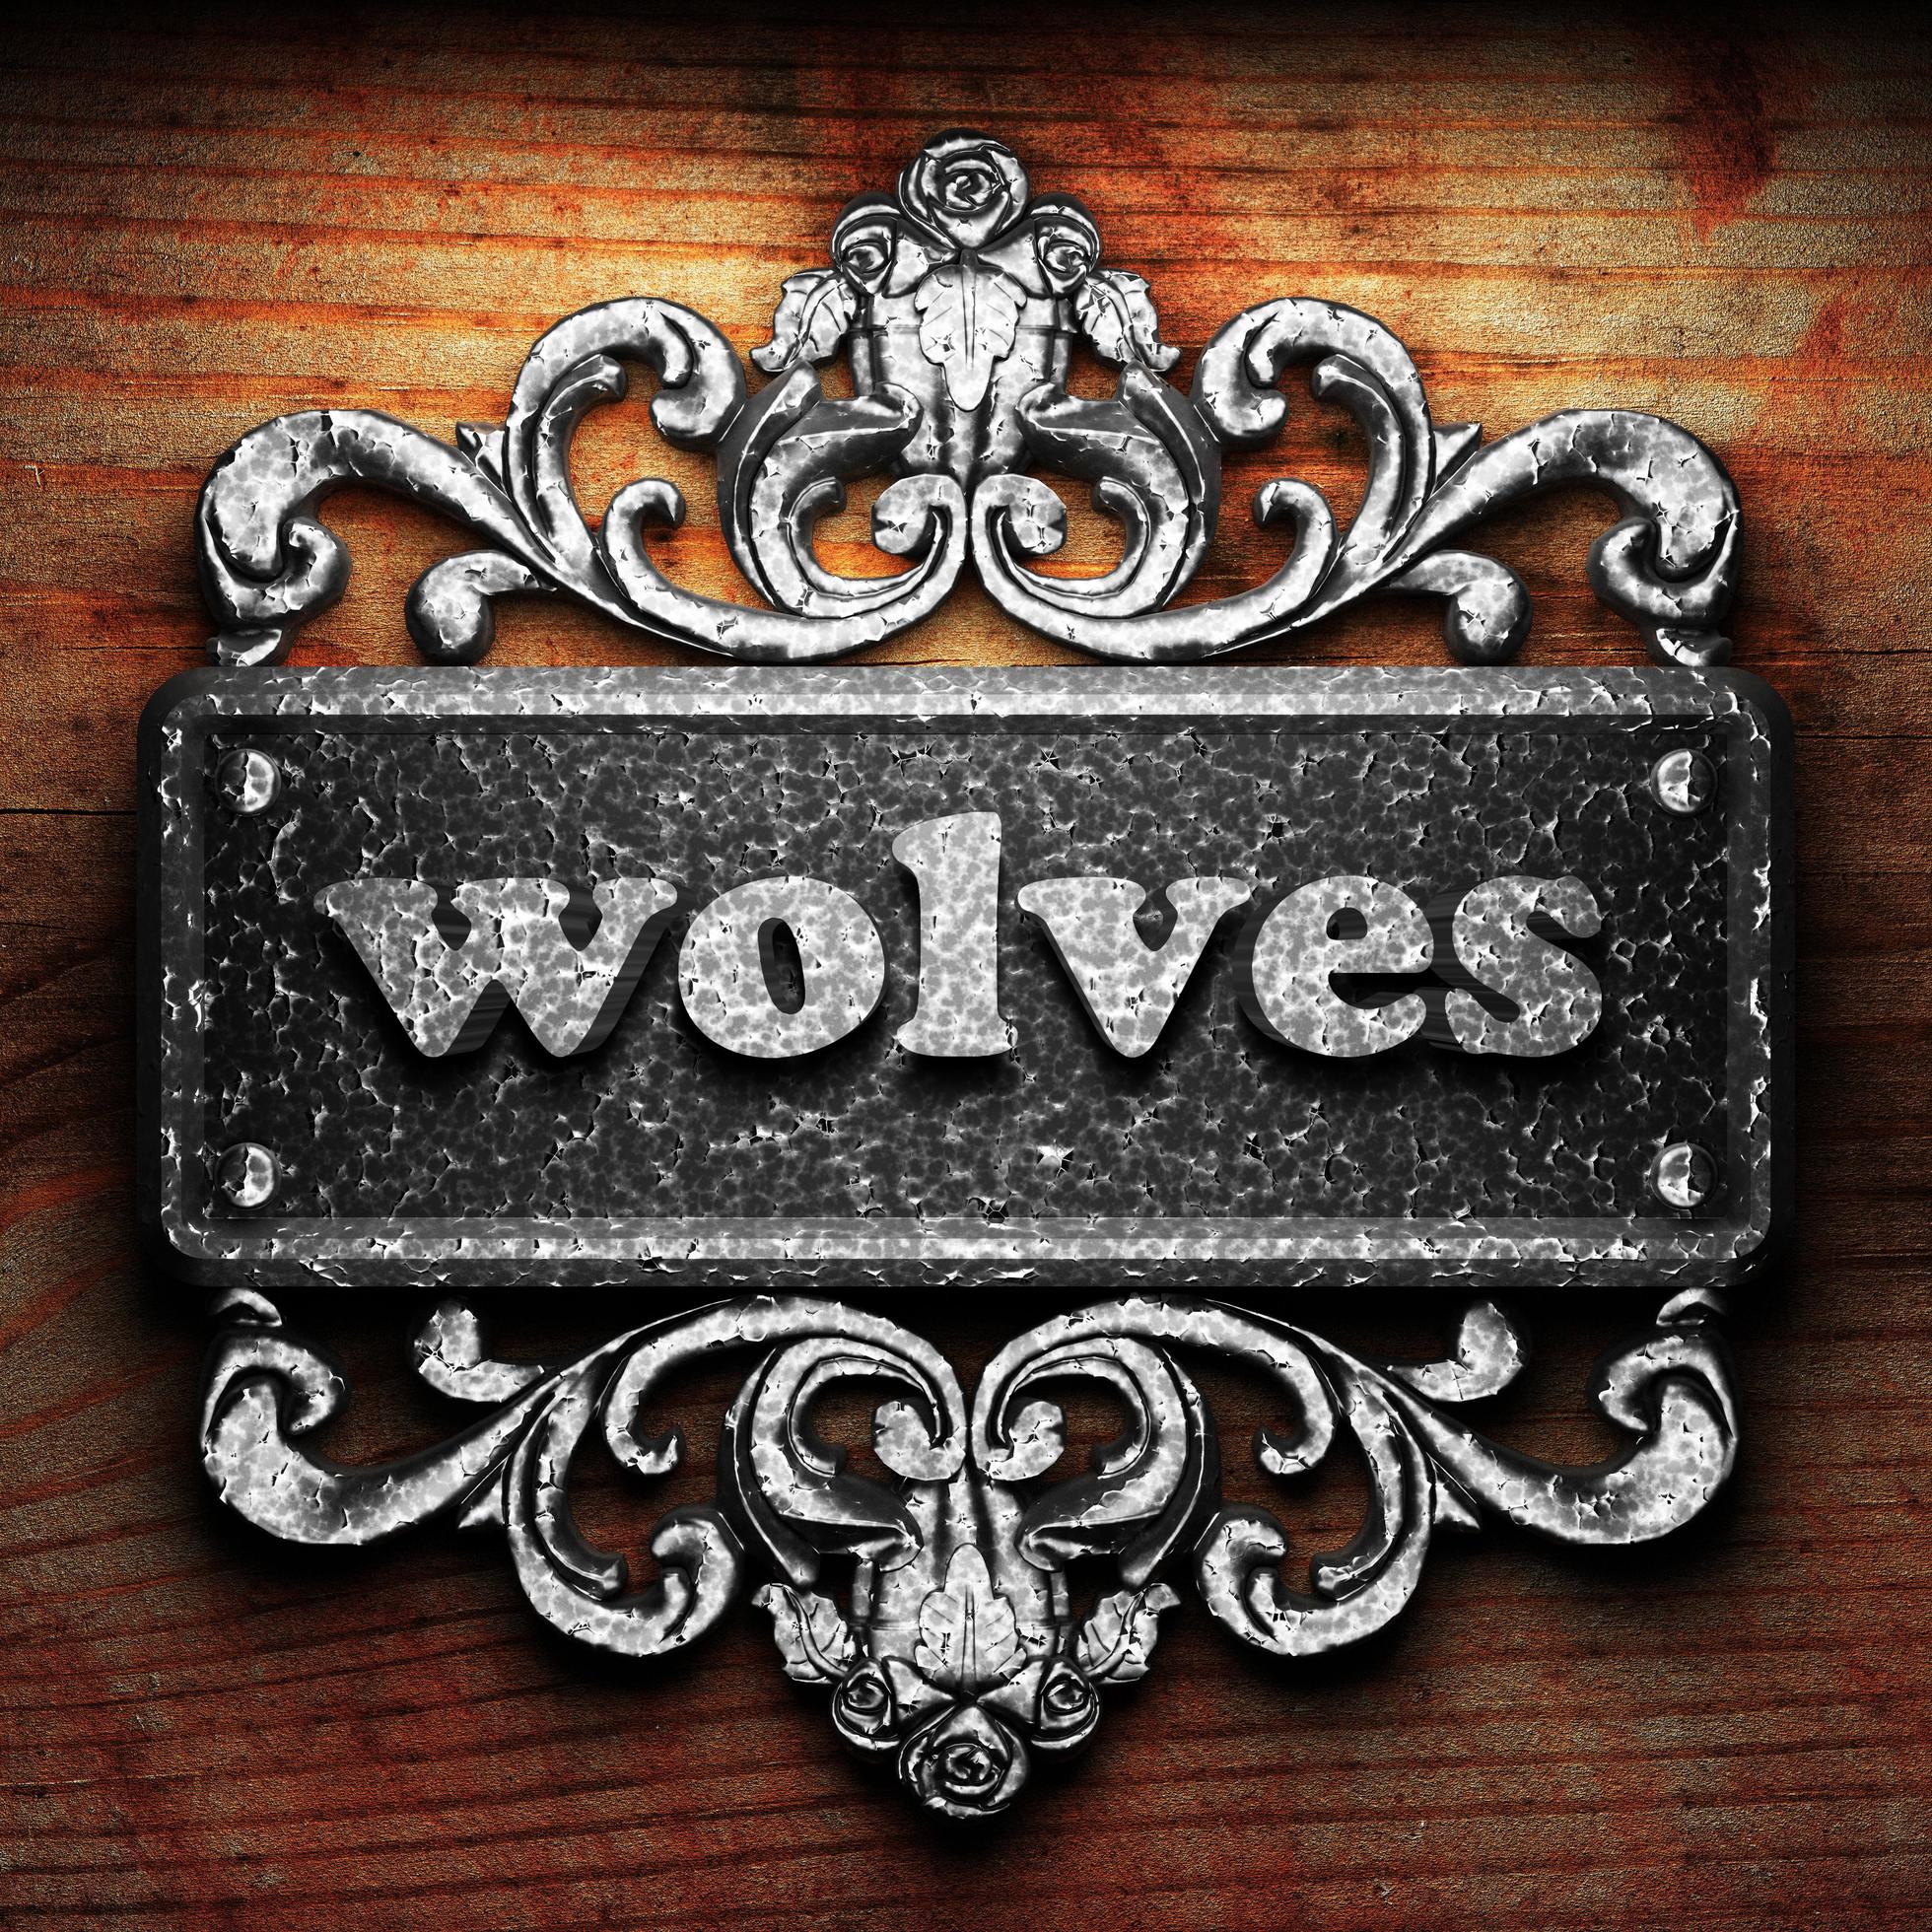 wolves-word-of-iron-on-wooden-background-6307855-stock-photo-at-vecteezy